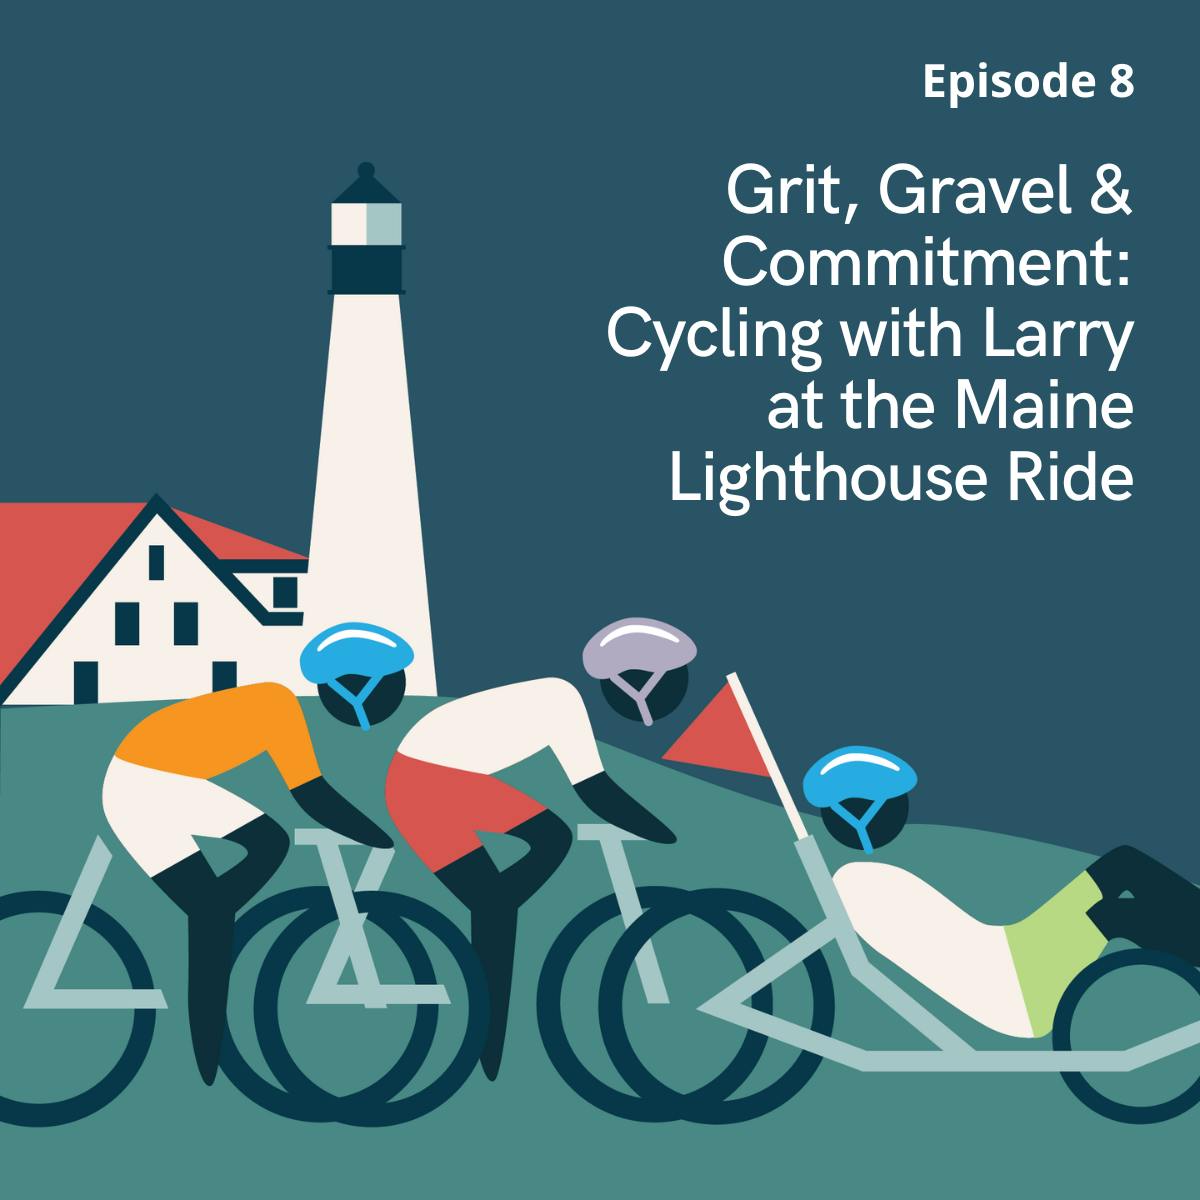 Grit, Gravel & Commitment: Cycling with Larry at the Maine Lighthouse Ride